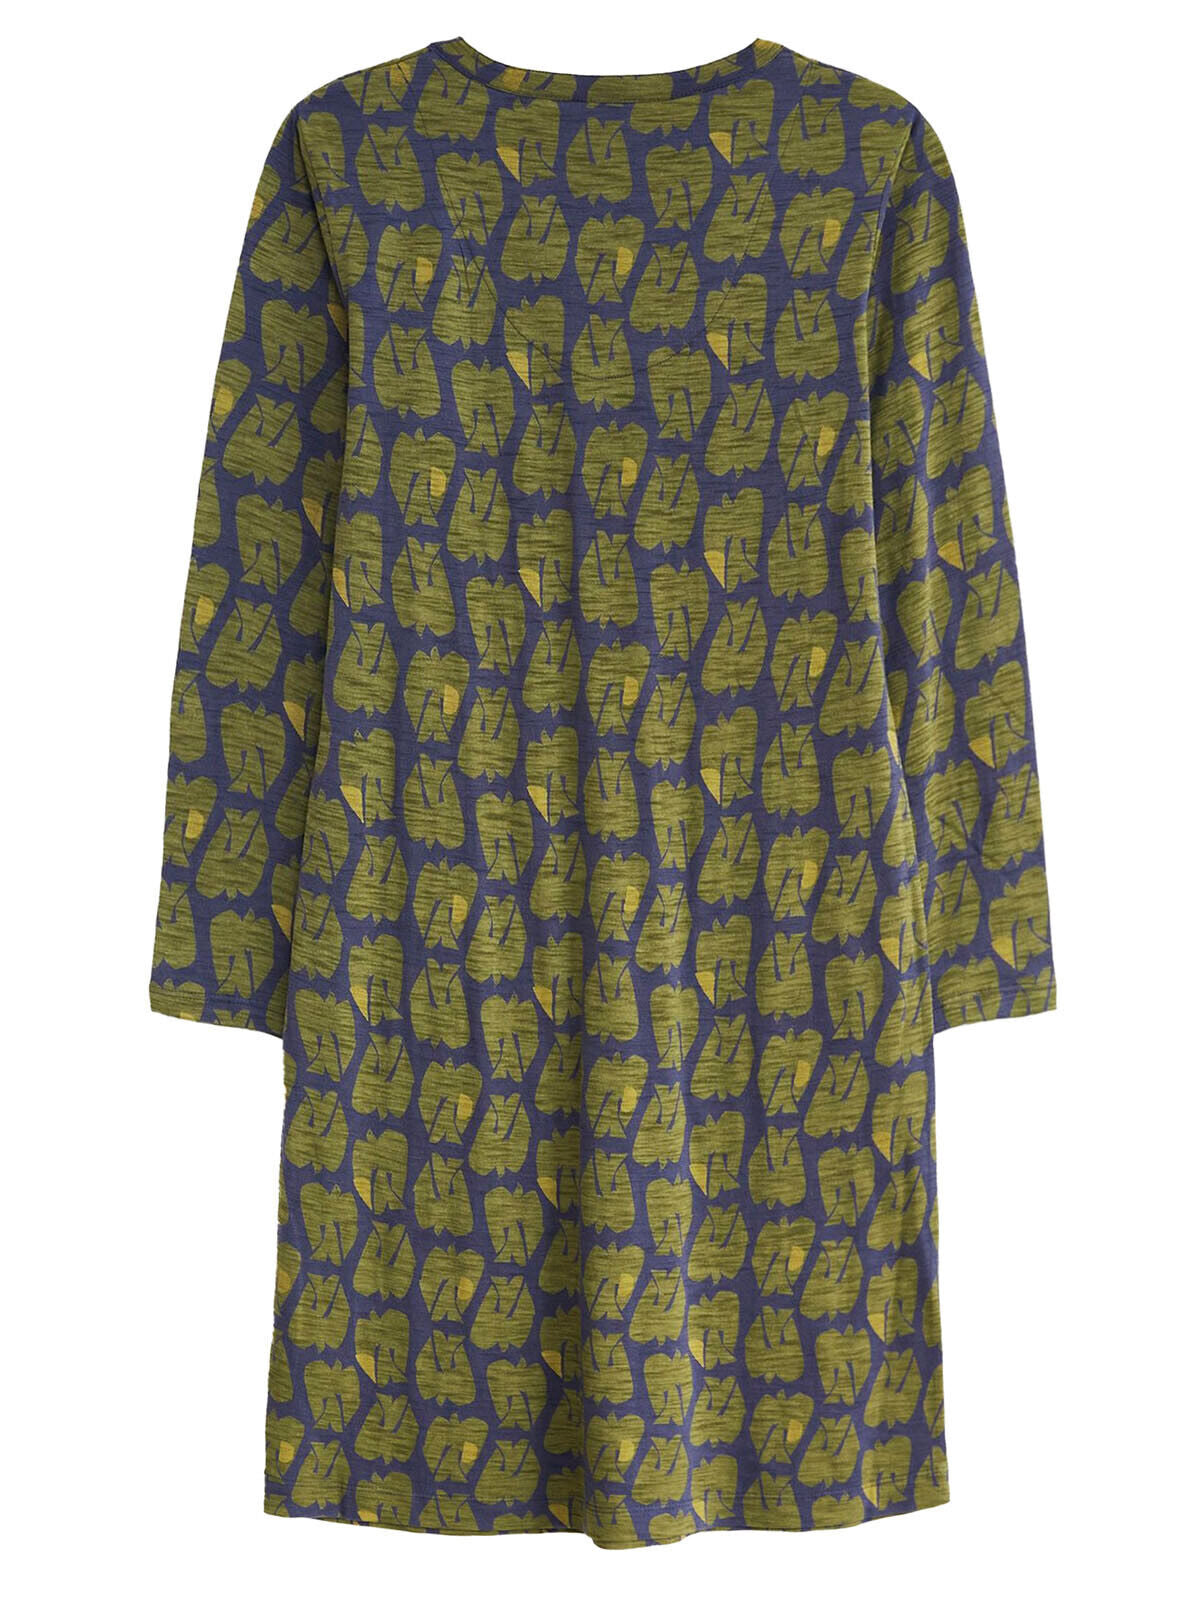 EX WHITE STUFF Green Bea Dress in Sizes 10 or 18 RRP £59